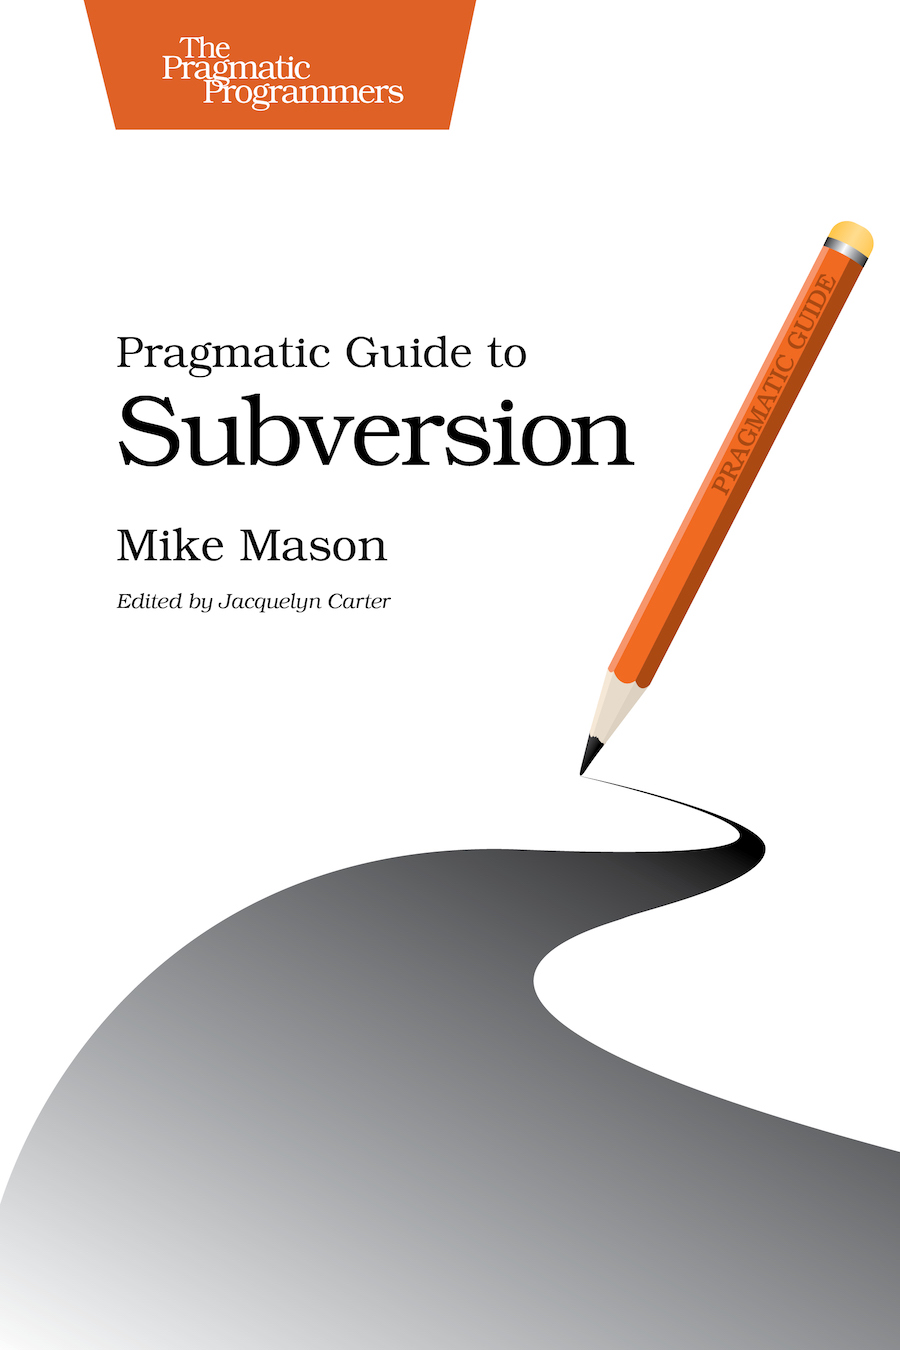 Subversion Meaning and Definition